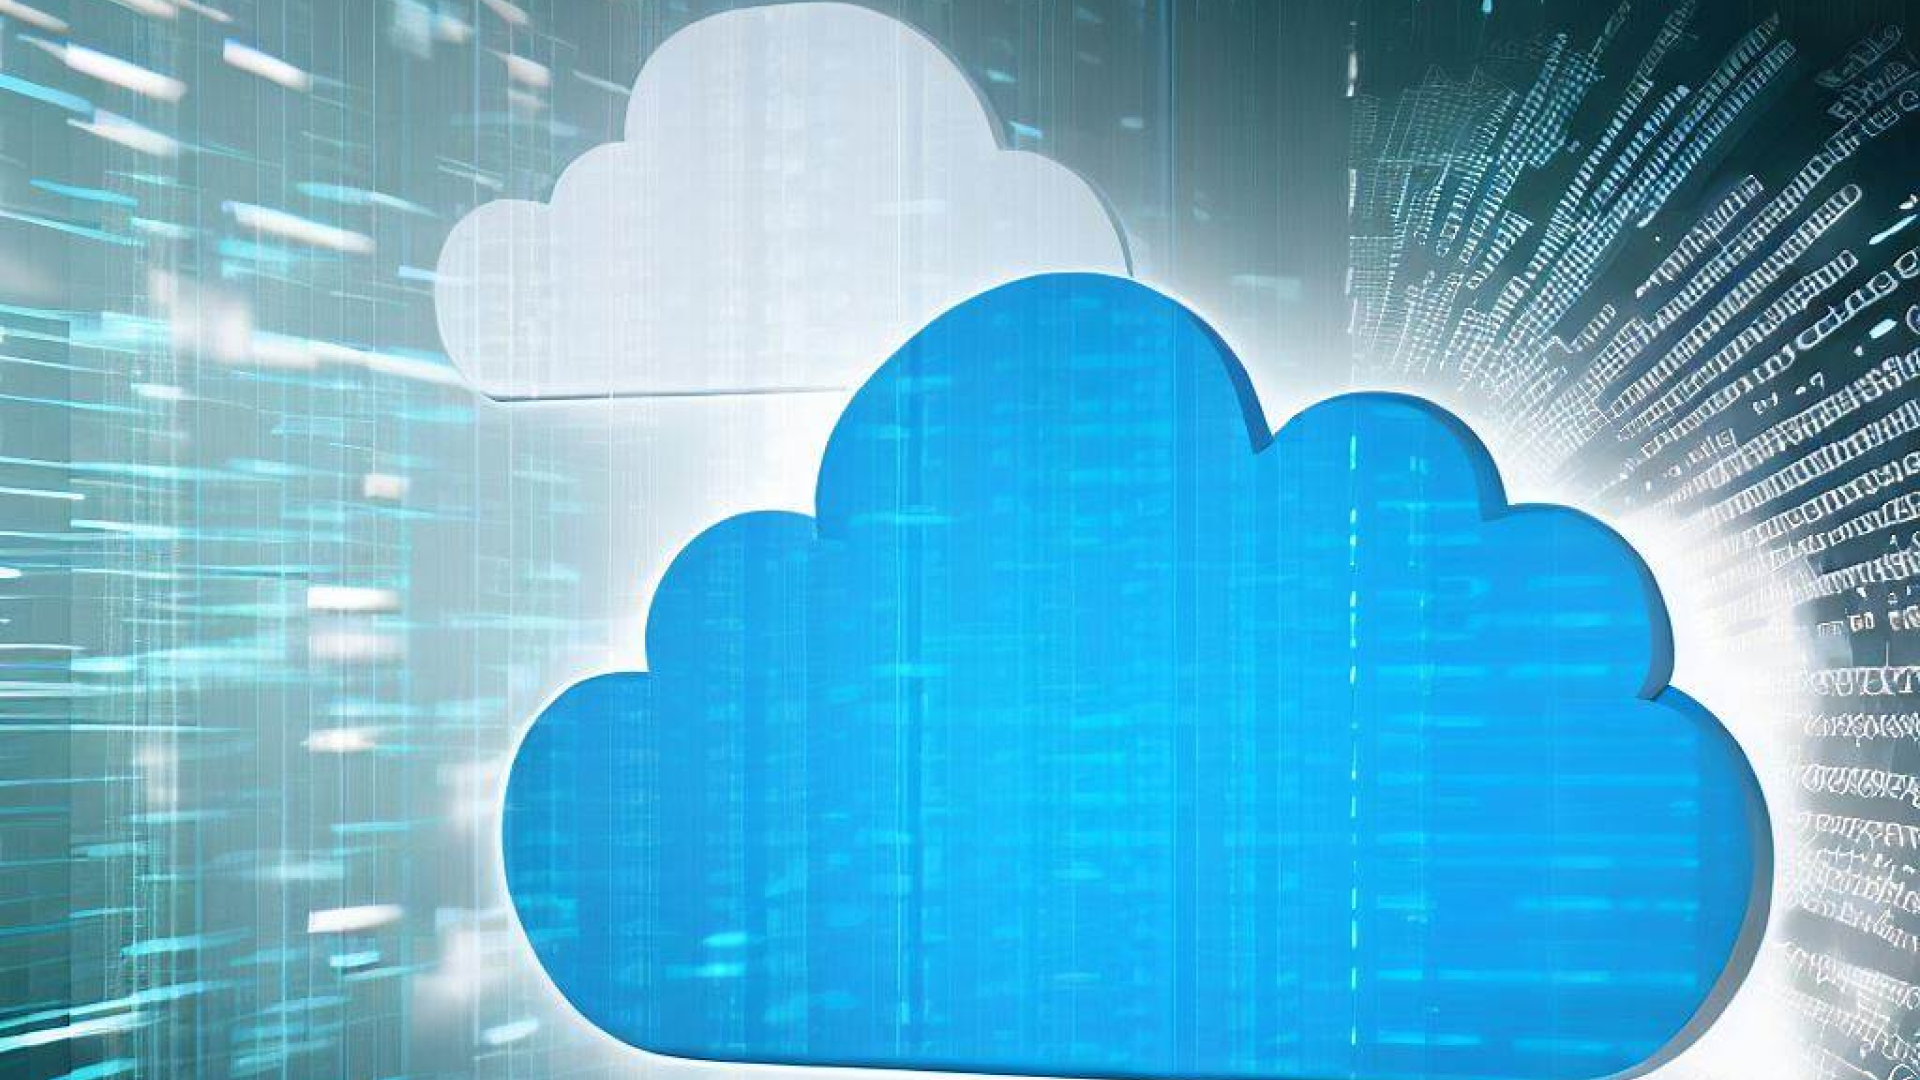 Cloud Backup And Recovery- Why It's Important And What Features To Look For